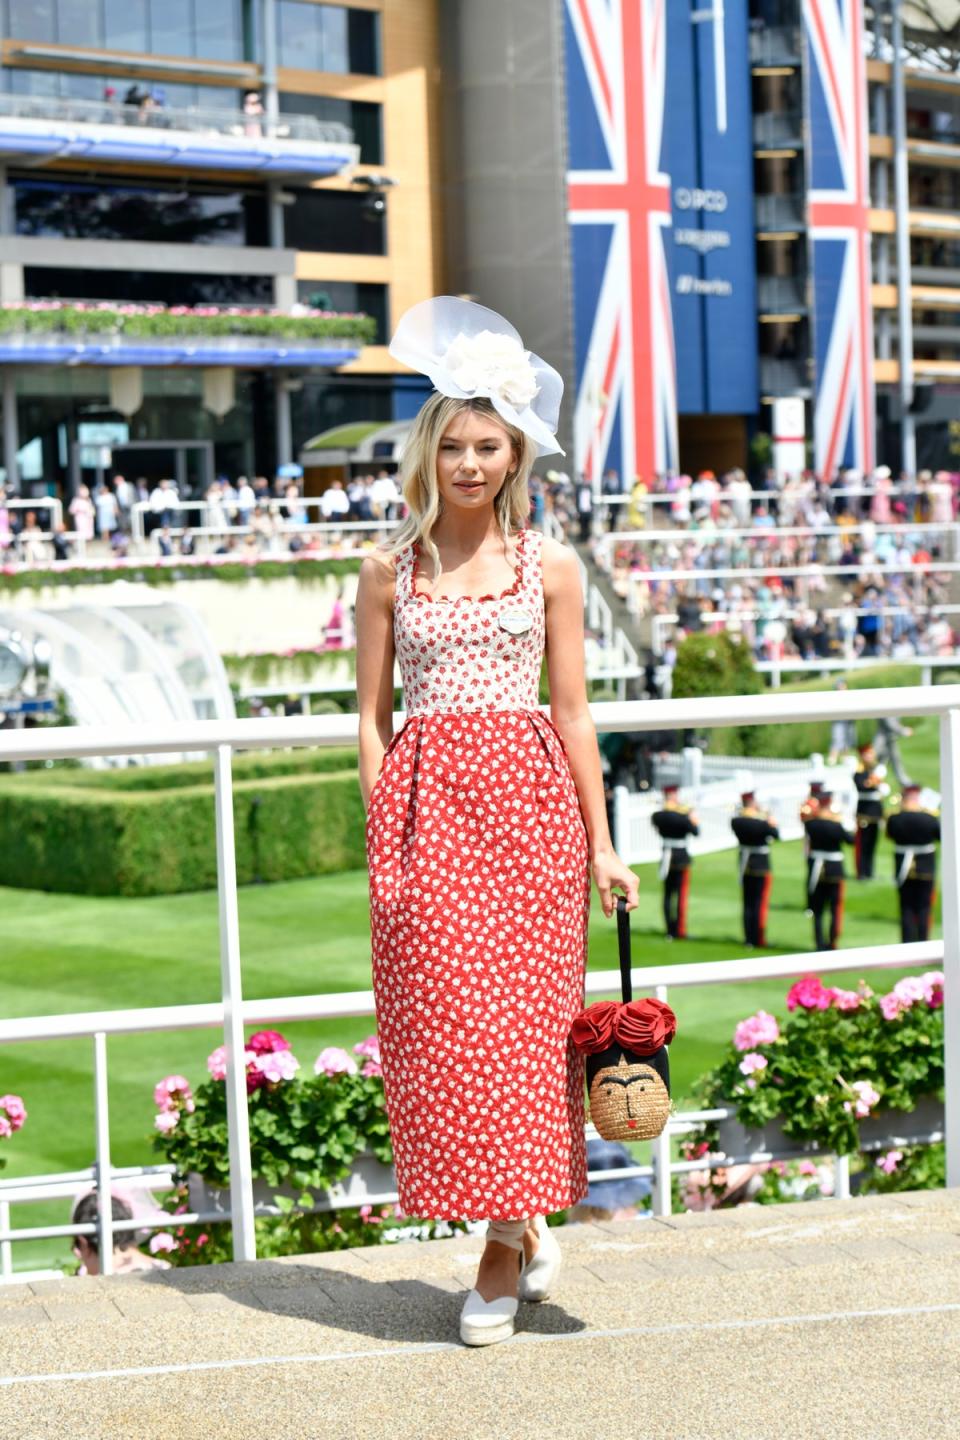 Toffolo was advocating “mindful drinking” at Ascot (Getty Images for Royal Ascot)